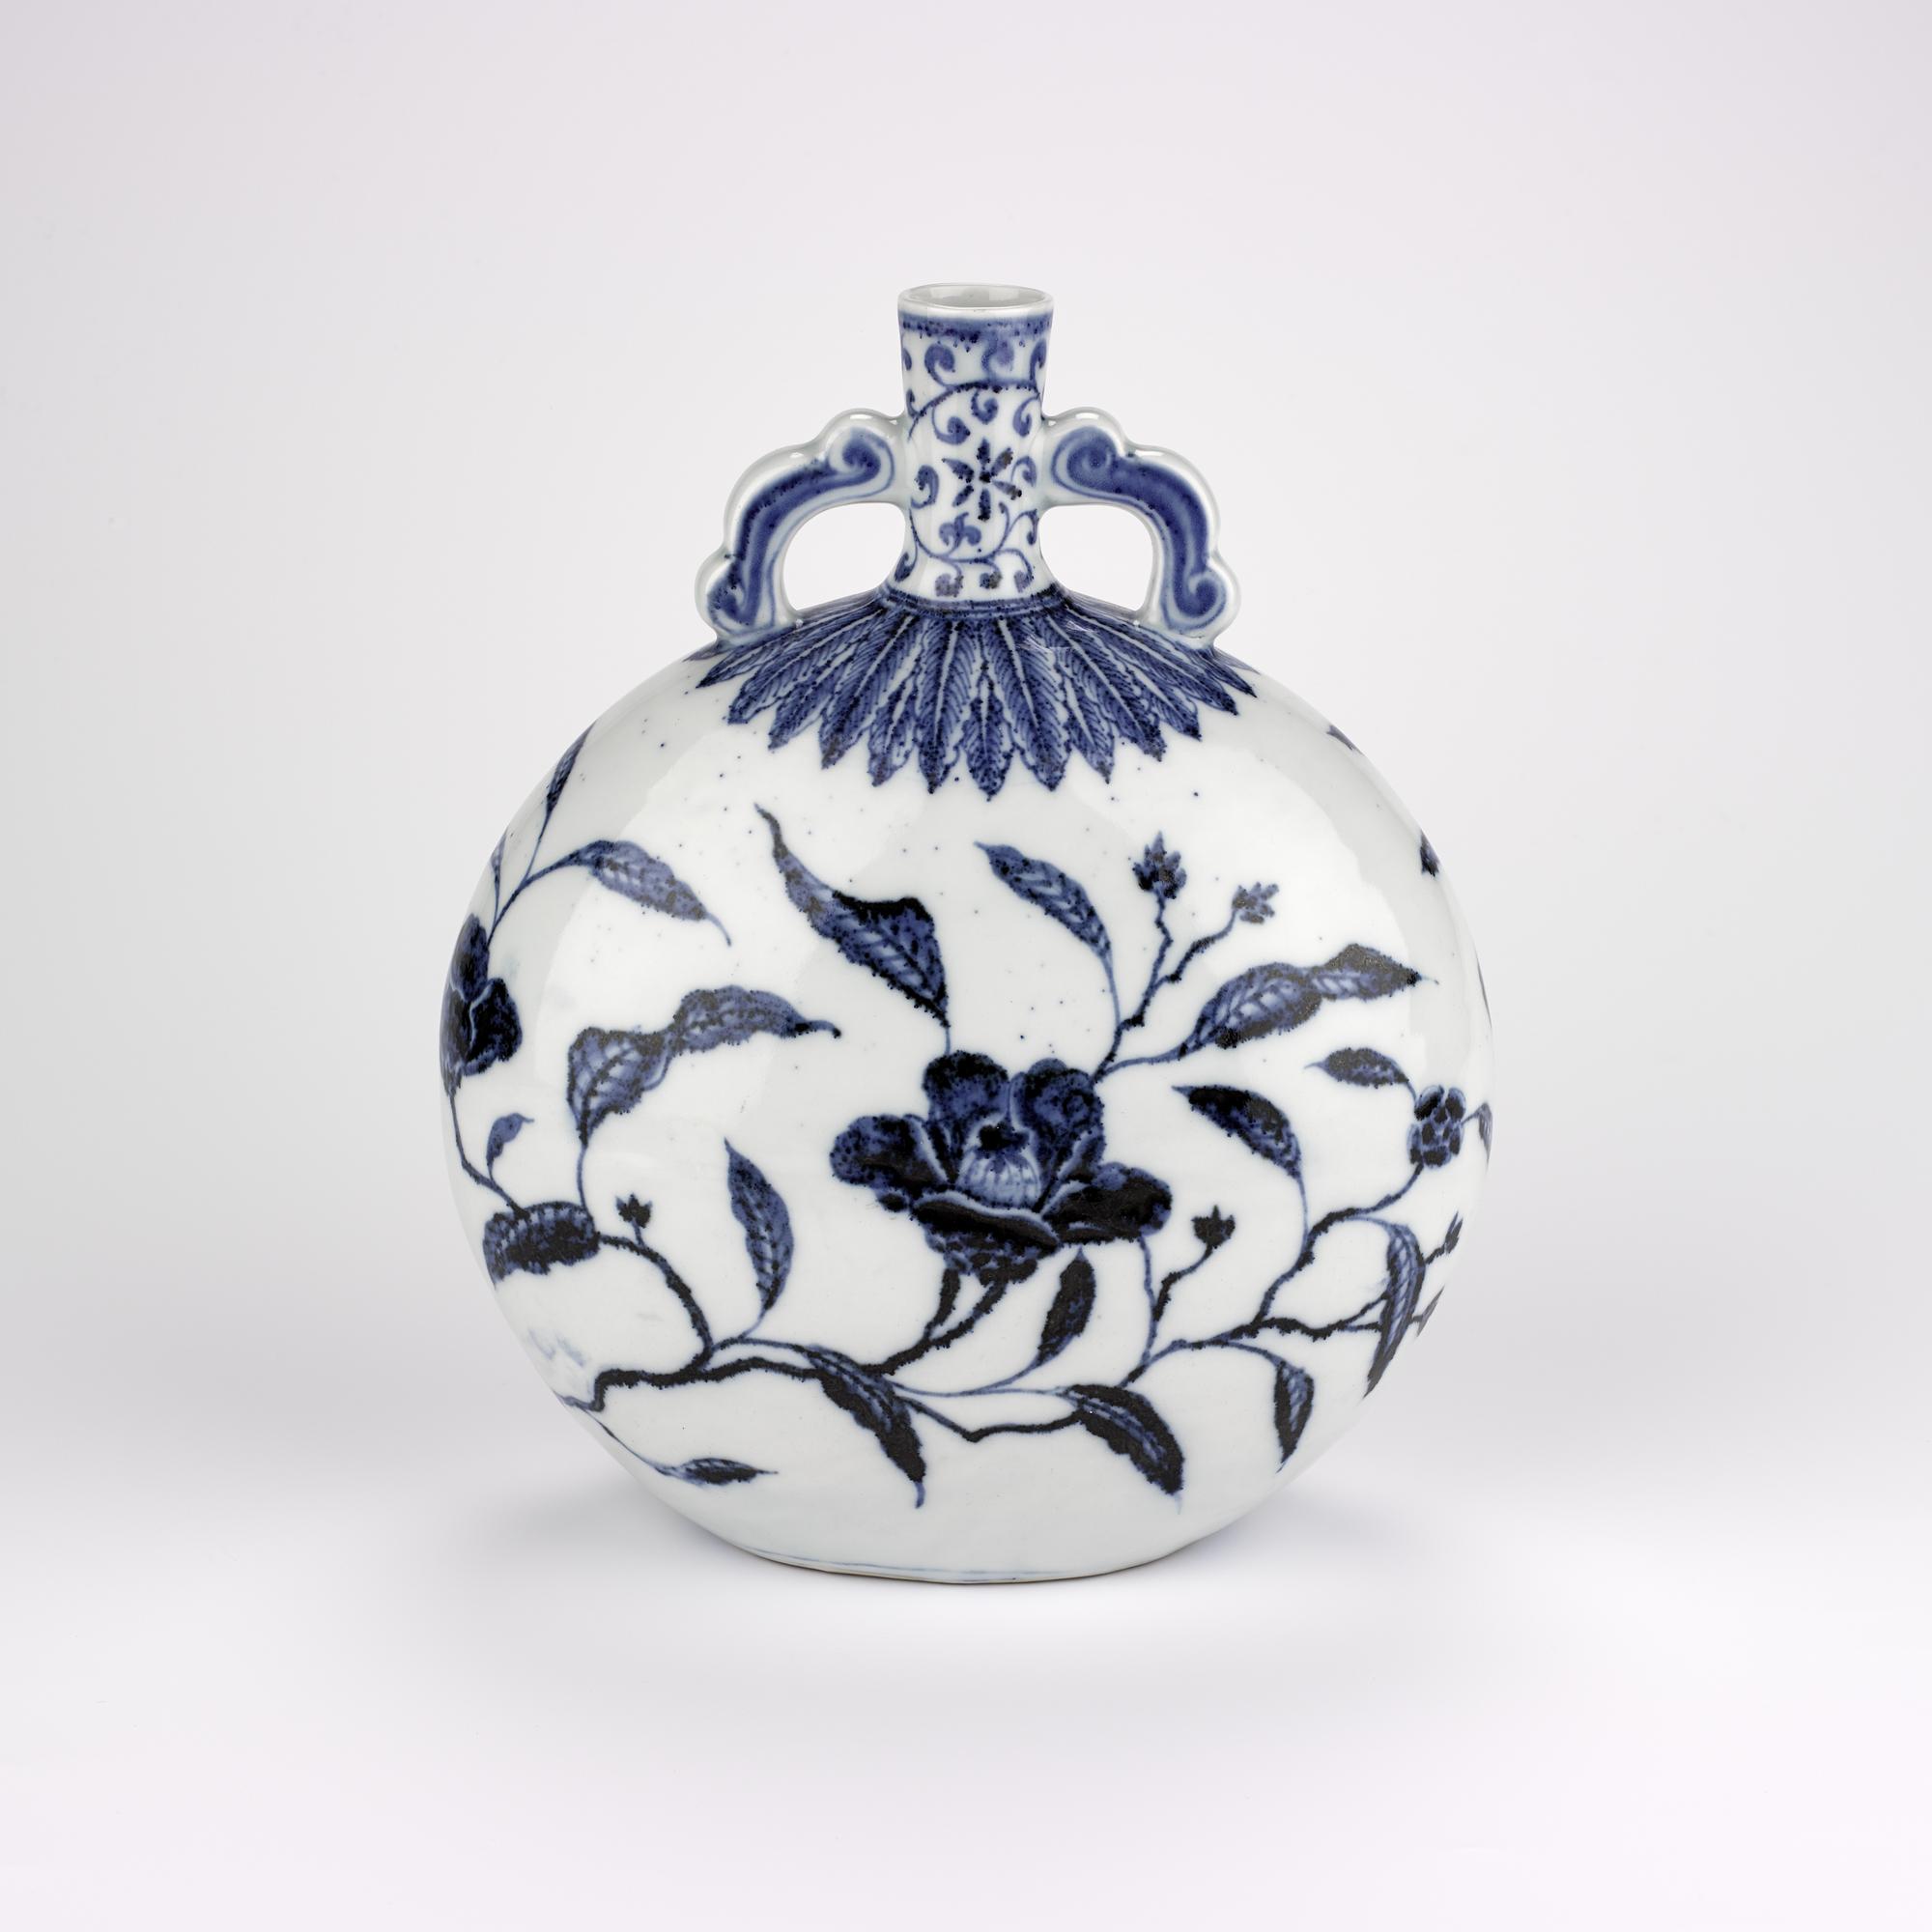 Porcelain moon vase, moon-shaped with narrow neck and two scrolled handles, painted in underglaze cobalt blue with magnolia flowers and leaves: China, Jiangxi Province, Jingdezhen kilns, Ming Dynasty, early 15th century AD.